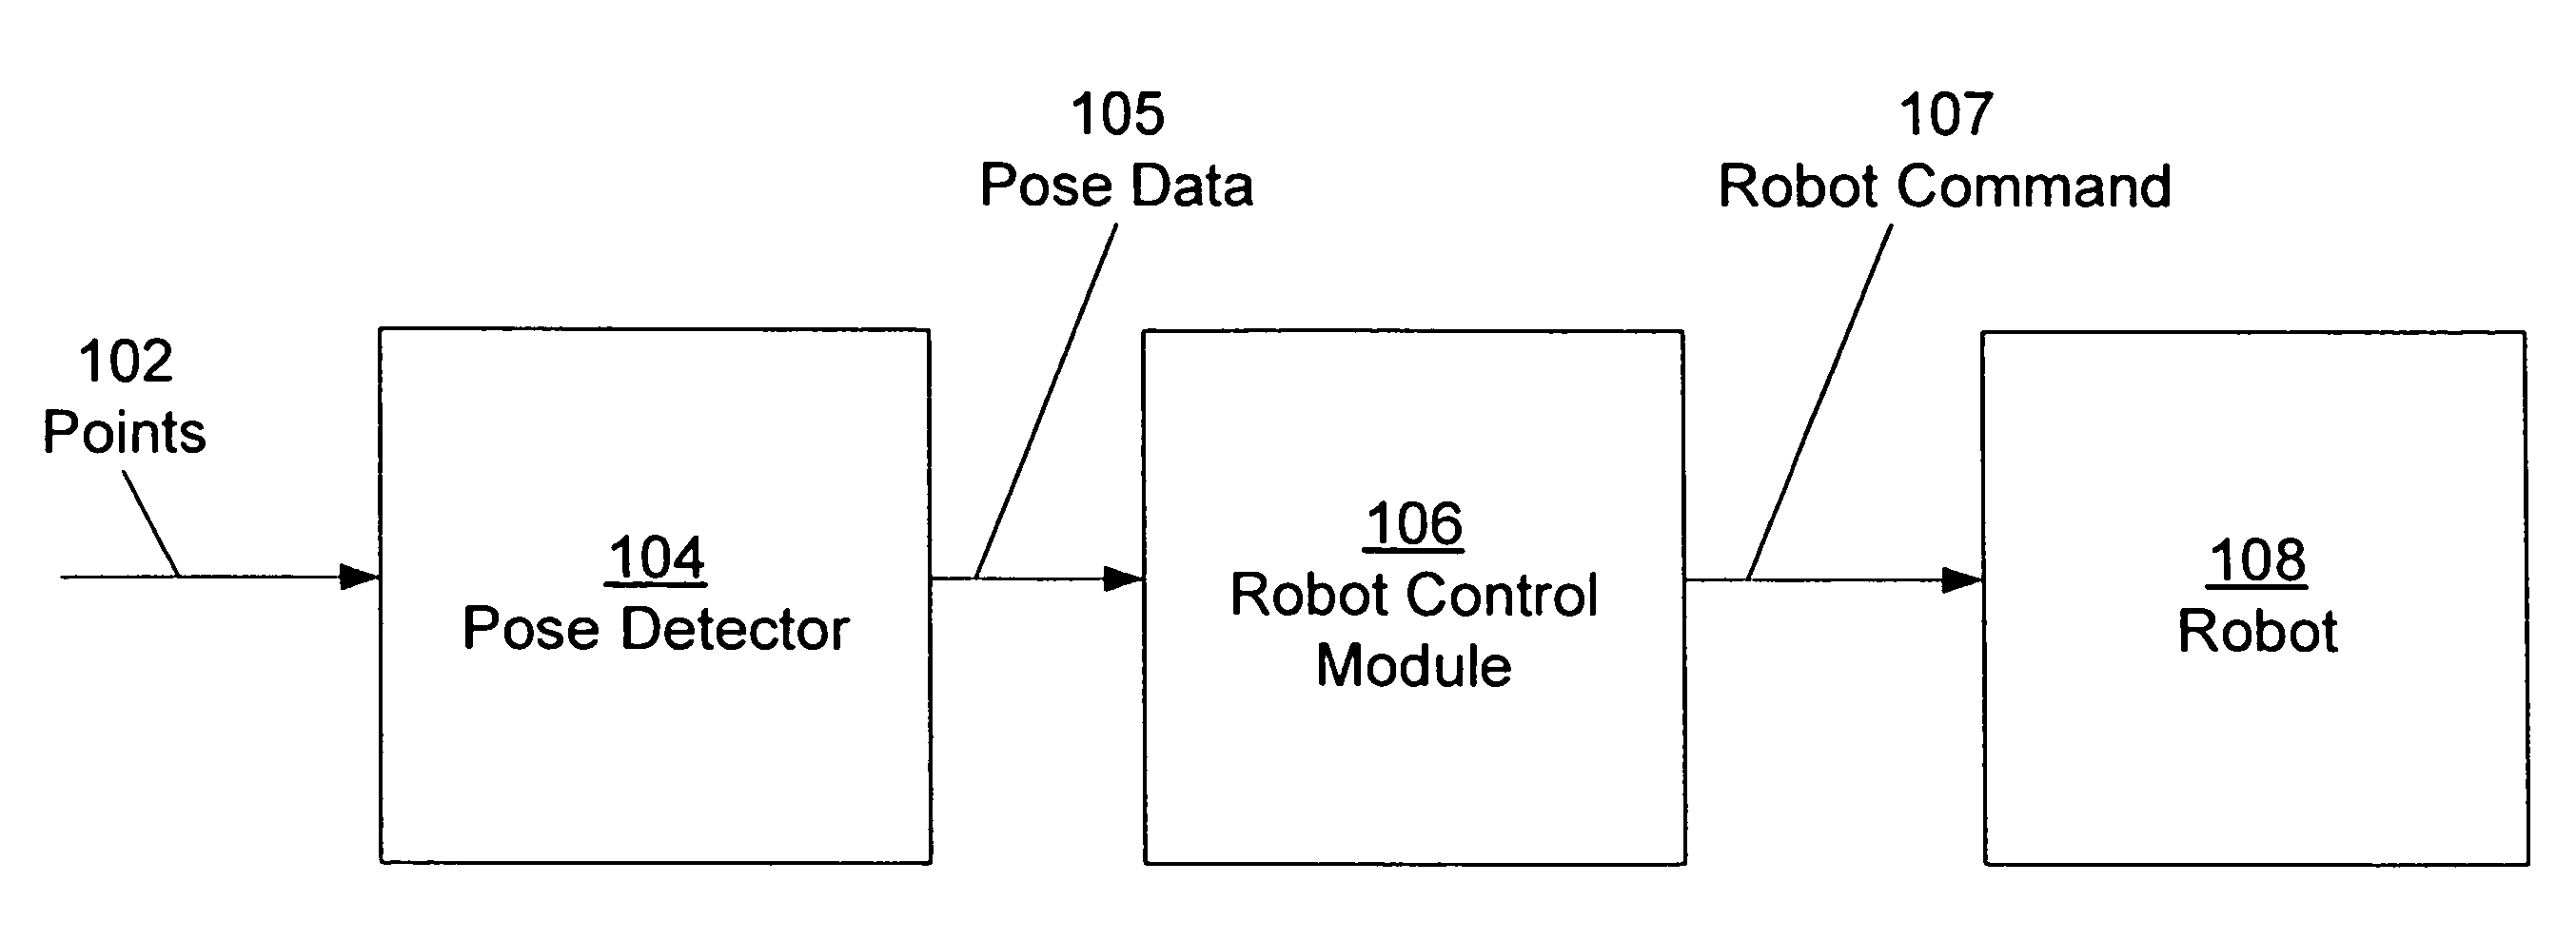 Controlling a robot using pose